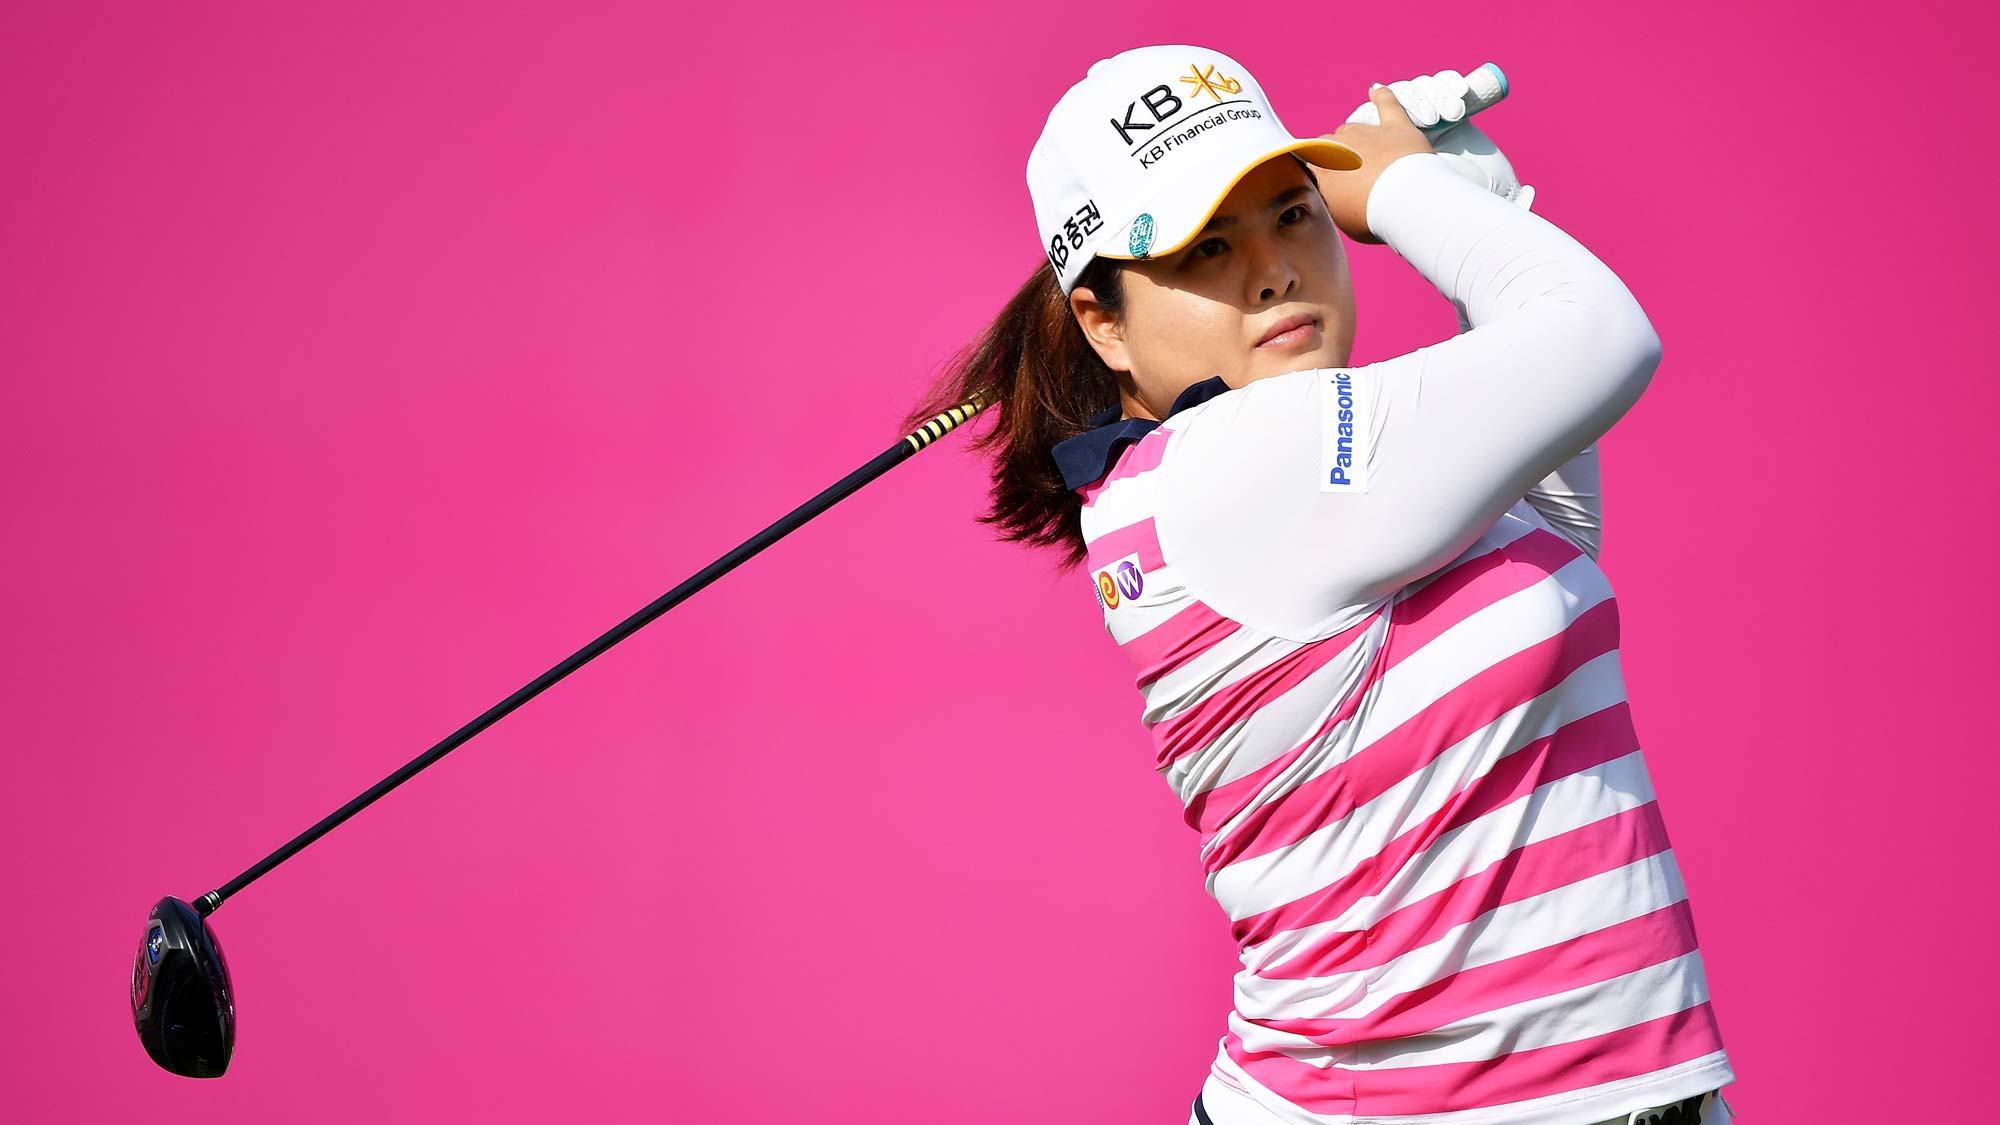 Inbee Park of South Korea tees off during day two of the Evian Championship